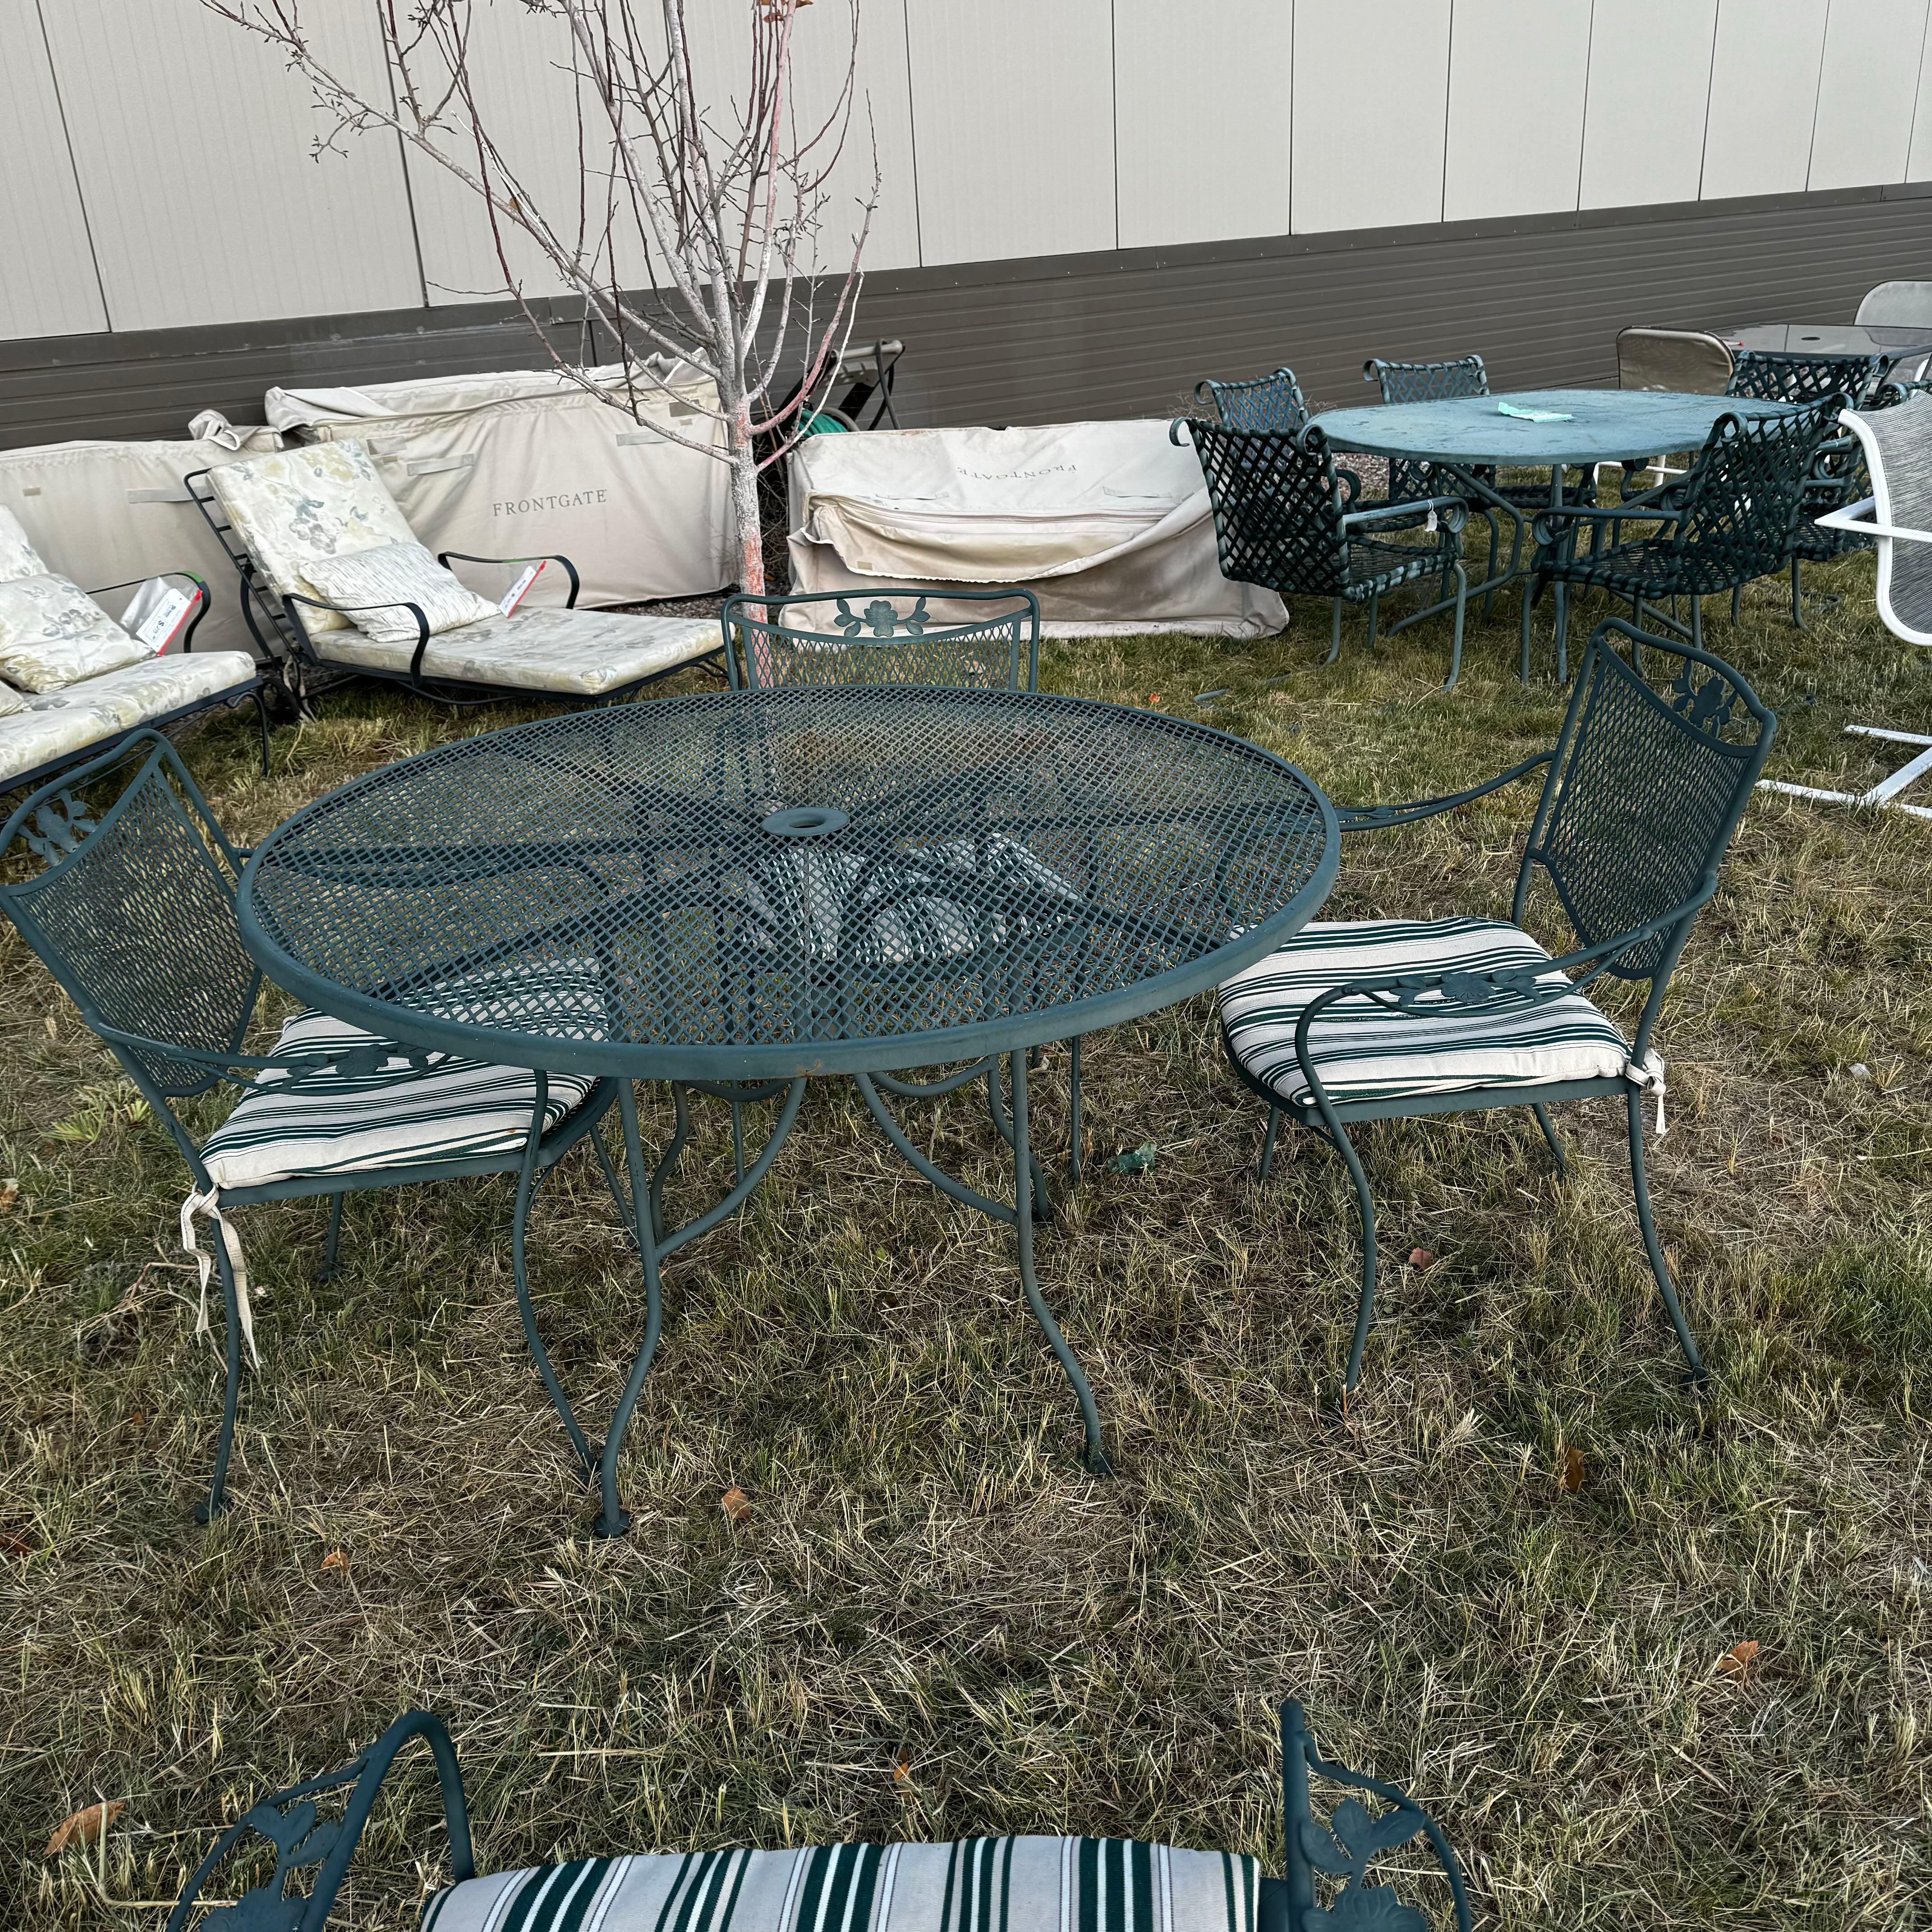 Brierwood Woven Metal with Flower Accents Patio Dining Set